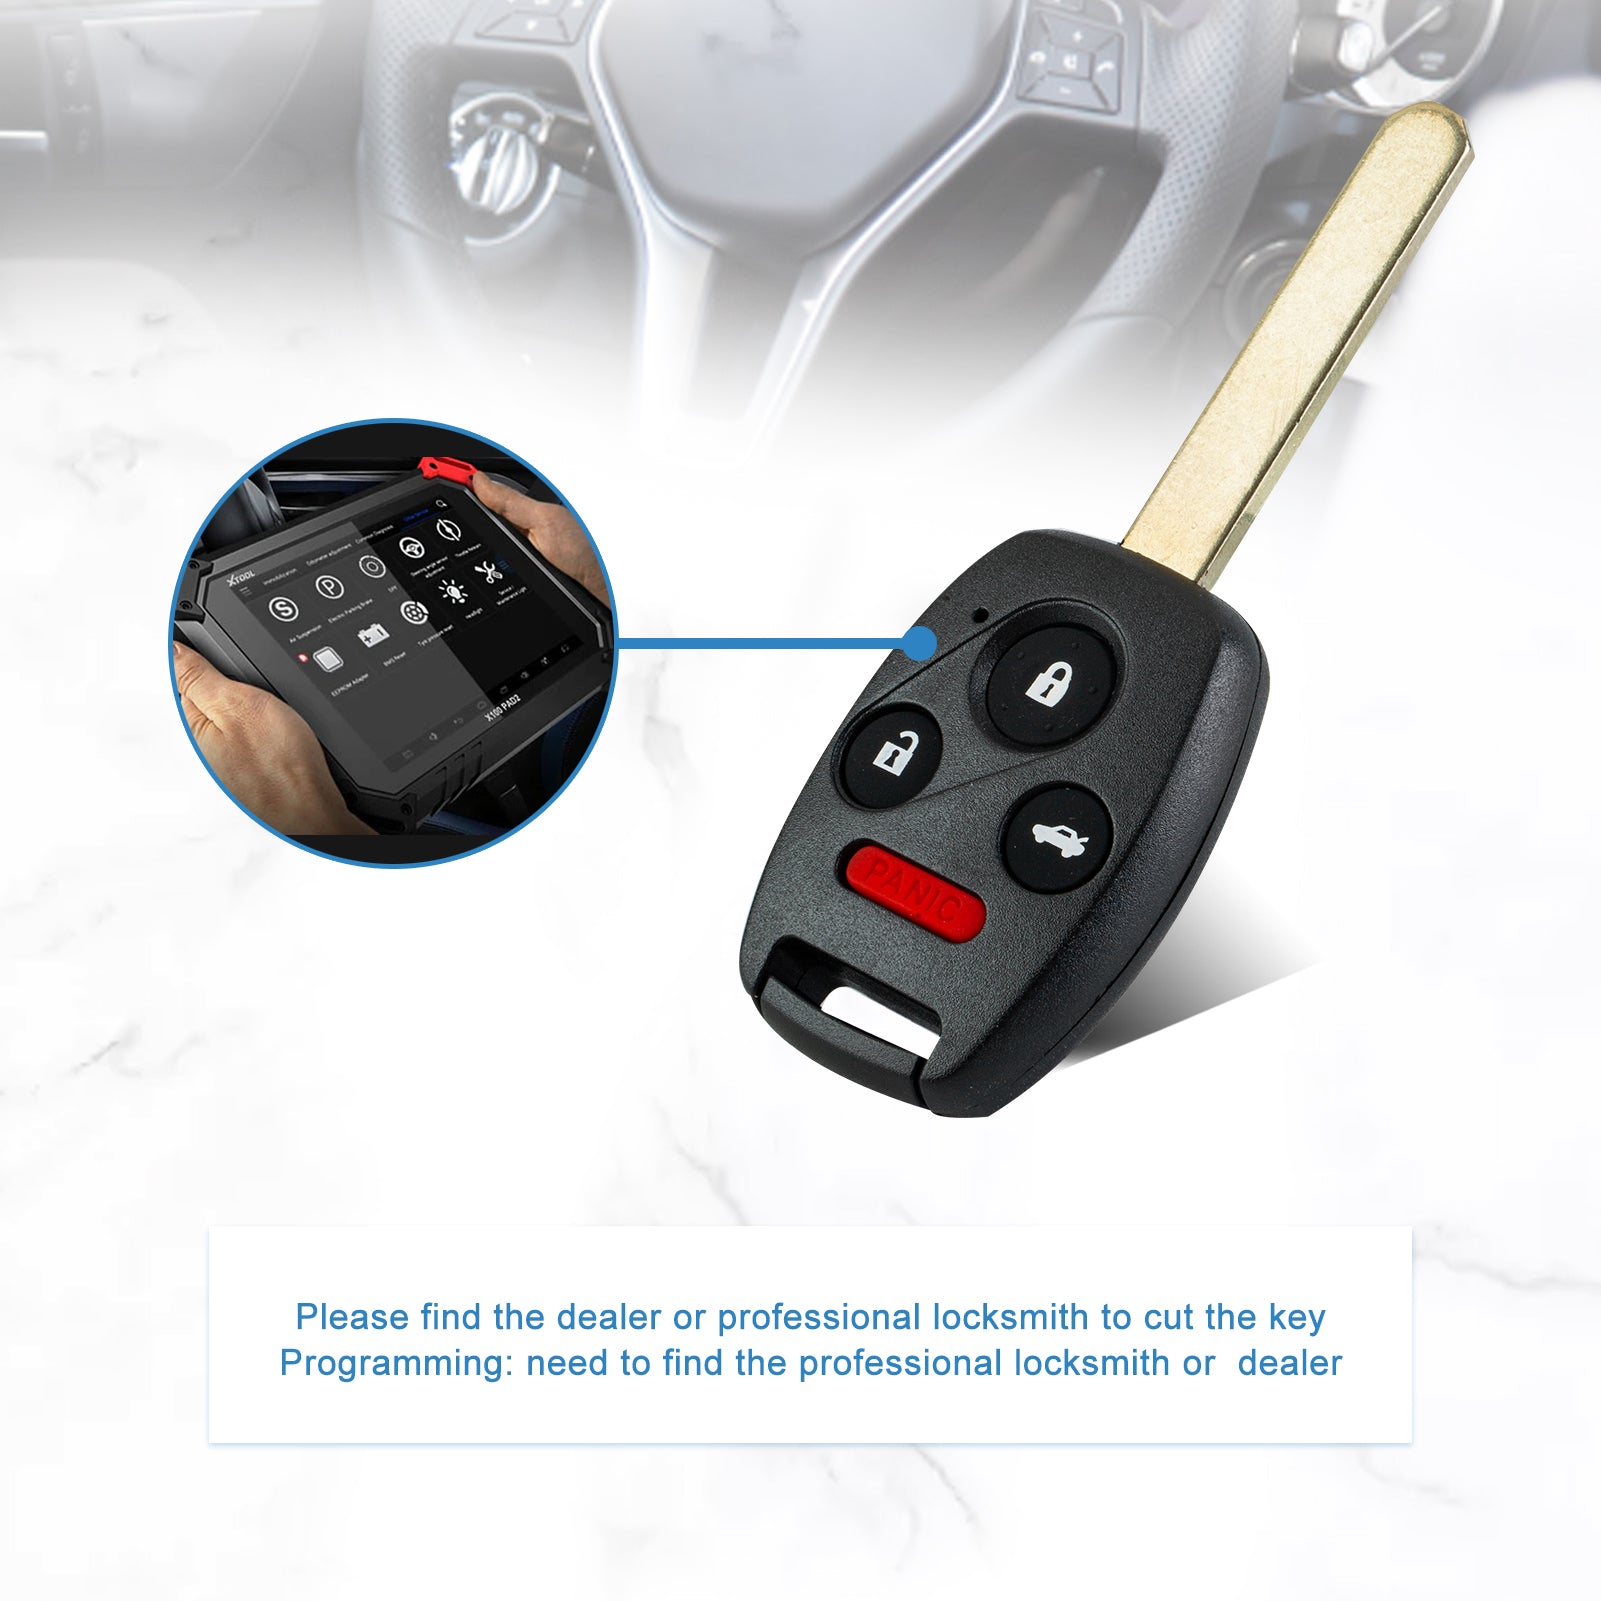 Button Car Remote Control Keyless Entry Remote 313.8MHZ Replacement for 2006-2011 Civic EX Si N5F-S0084A  KR-H4SB